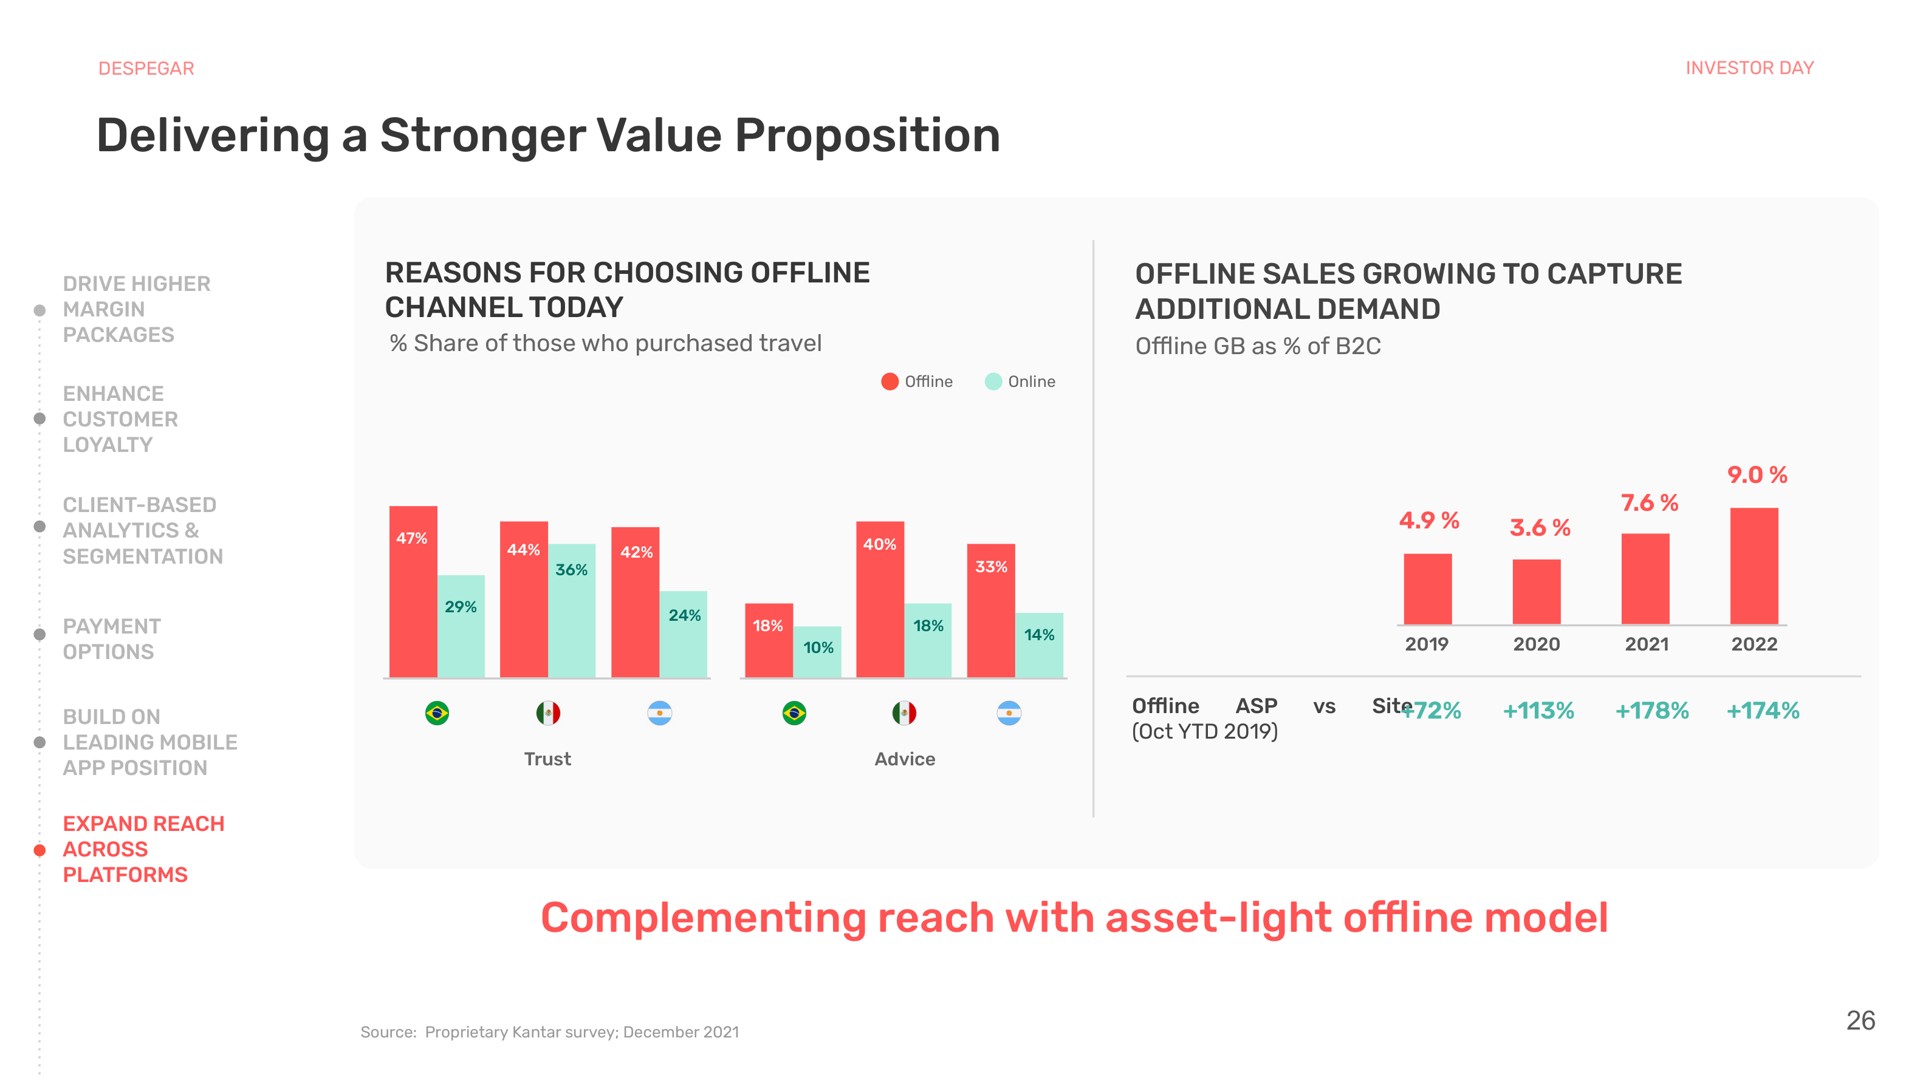 delivering a value proposition reasons for choosing channel today sales growing to capture additional demand complementing reach with asset light model | Despegar